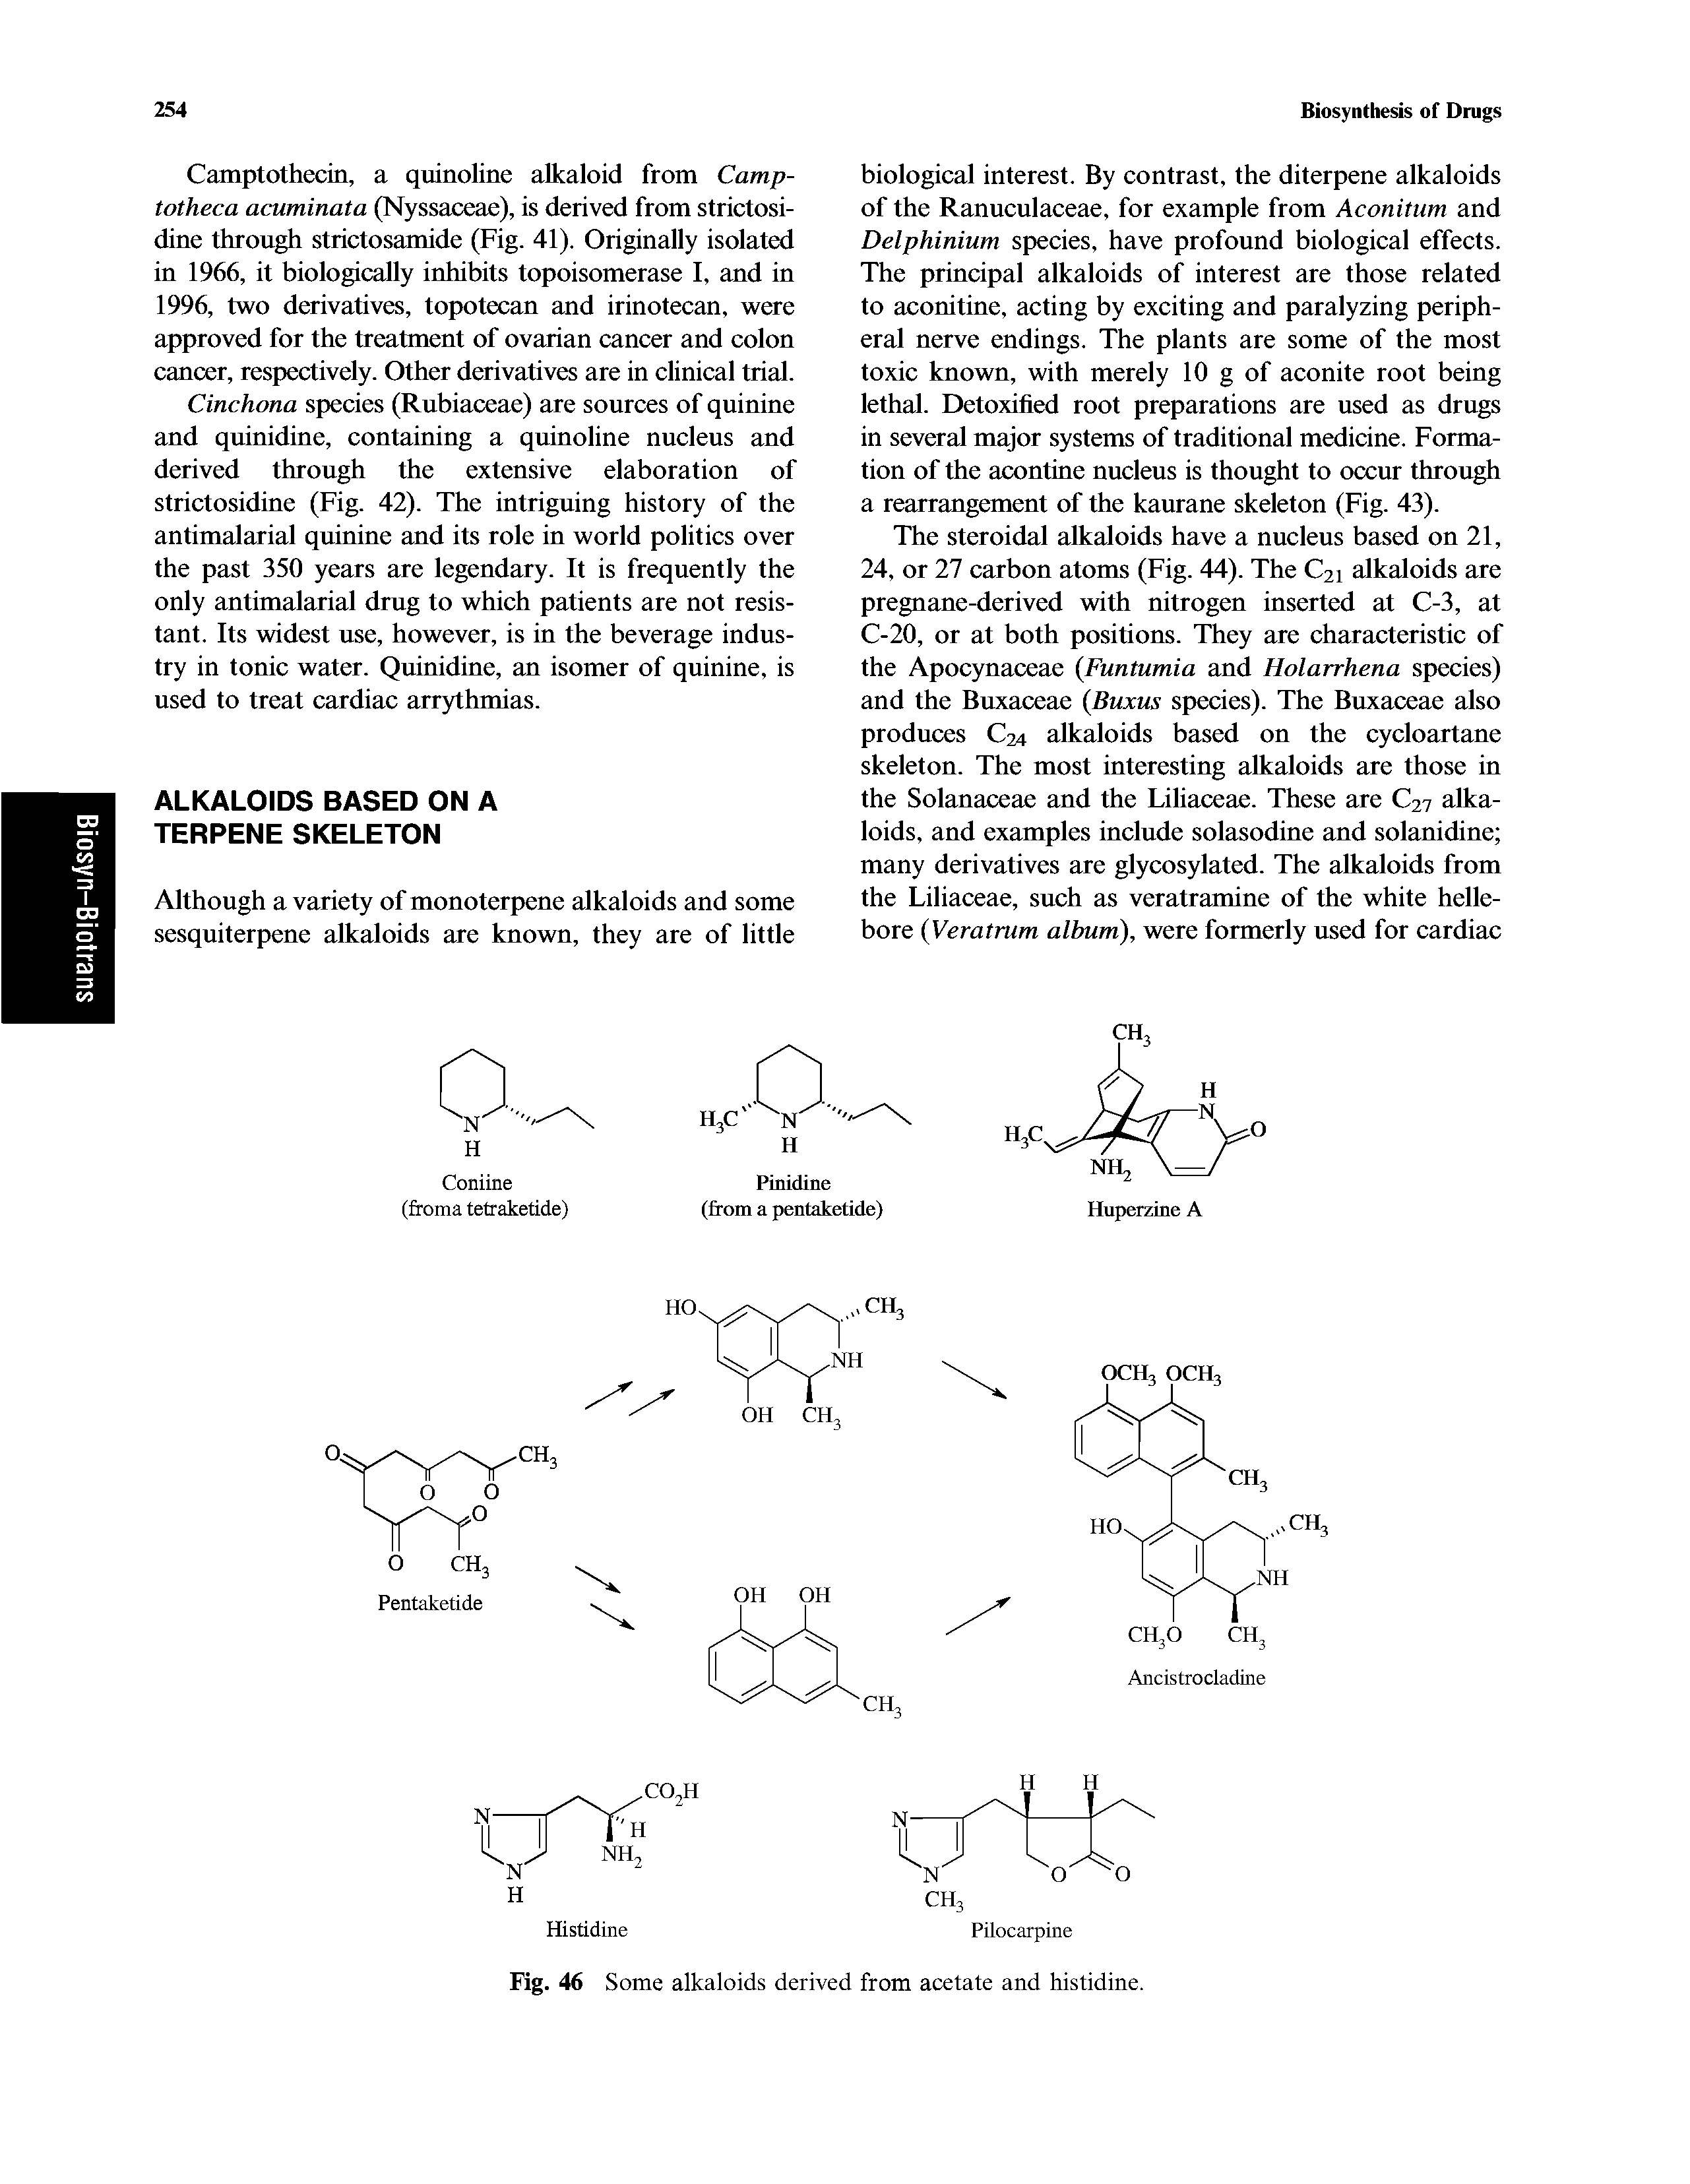 Fig. 46 Some alkaloids derived from acetate and histidine.